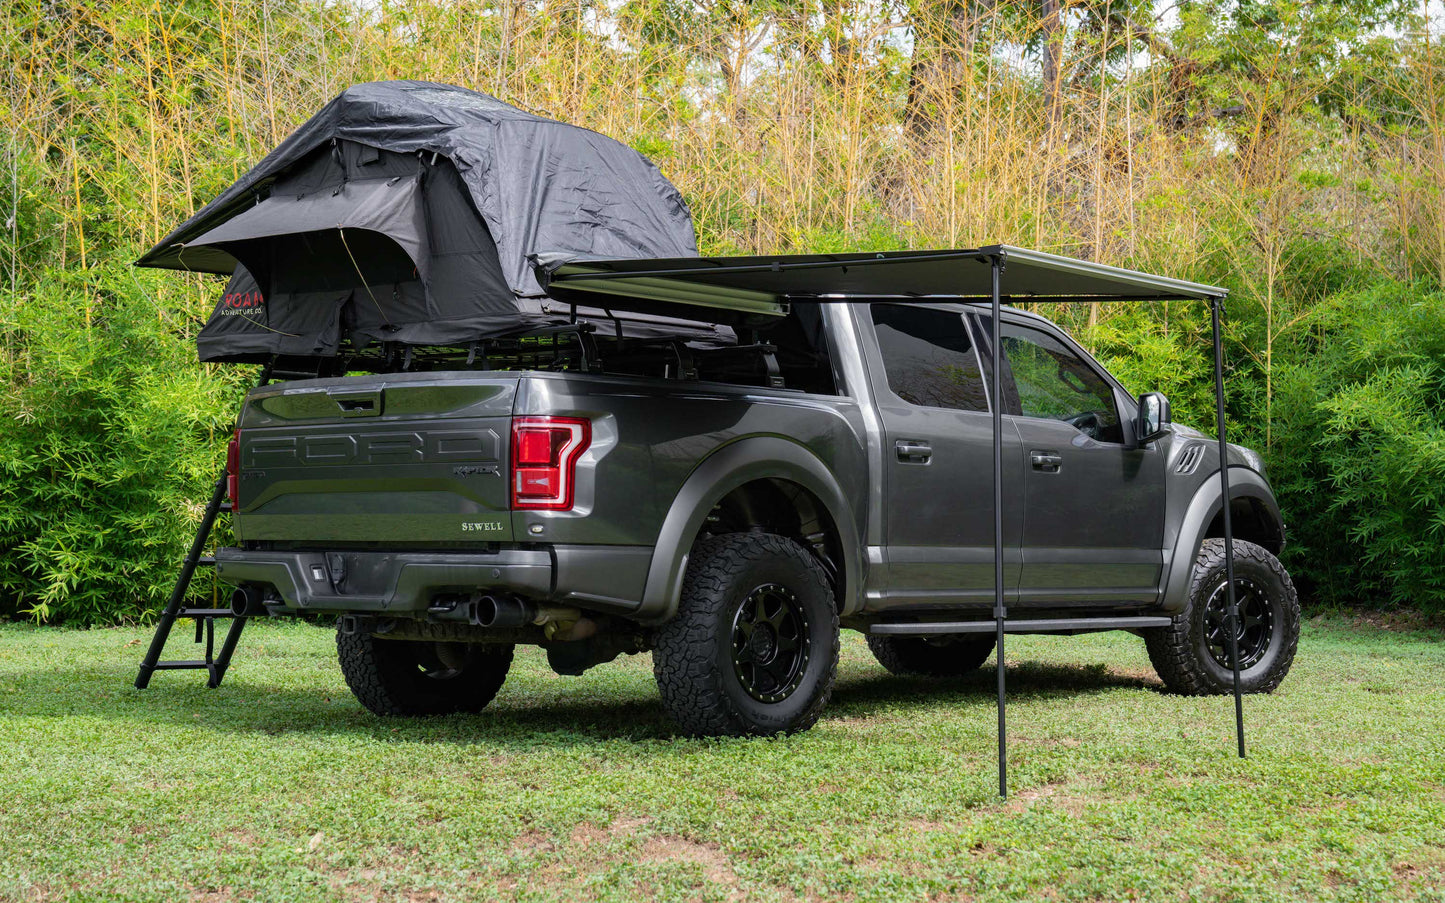 upfit ford f150 raptor for sale near new braunfels shertz texas reduced at hawkes outdoors 2102512882